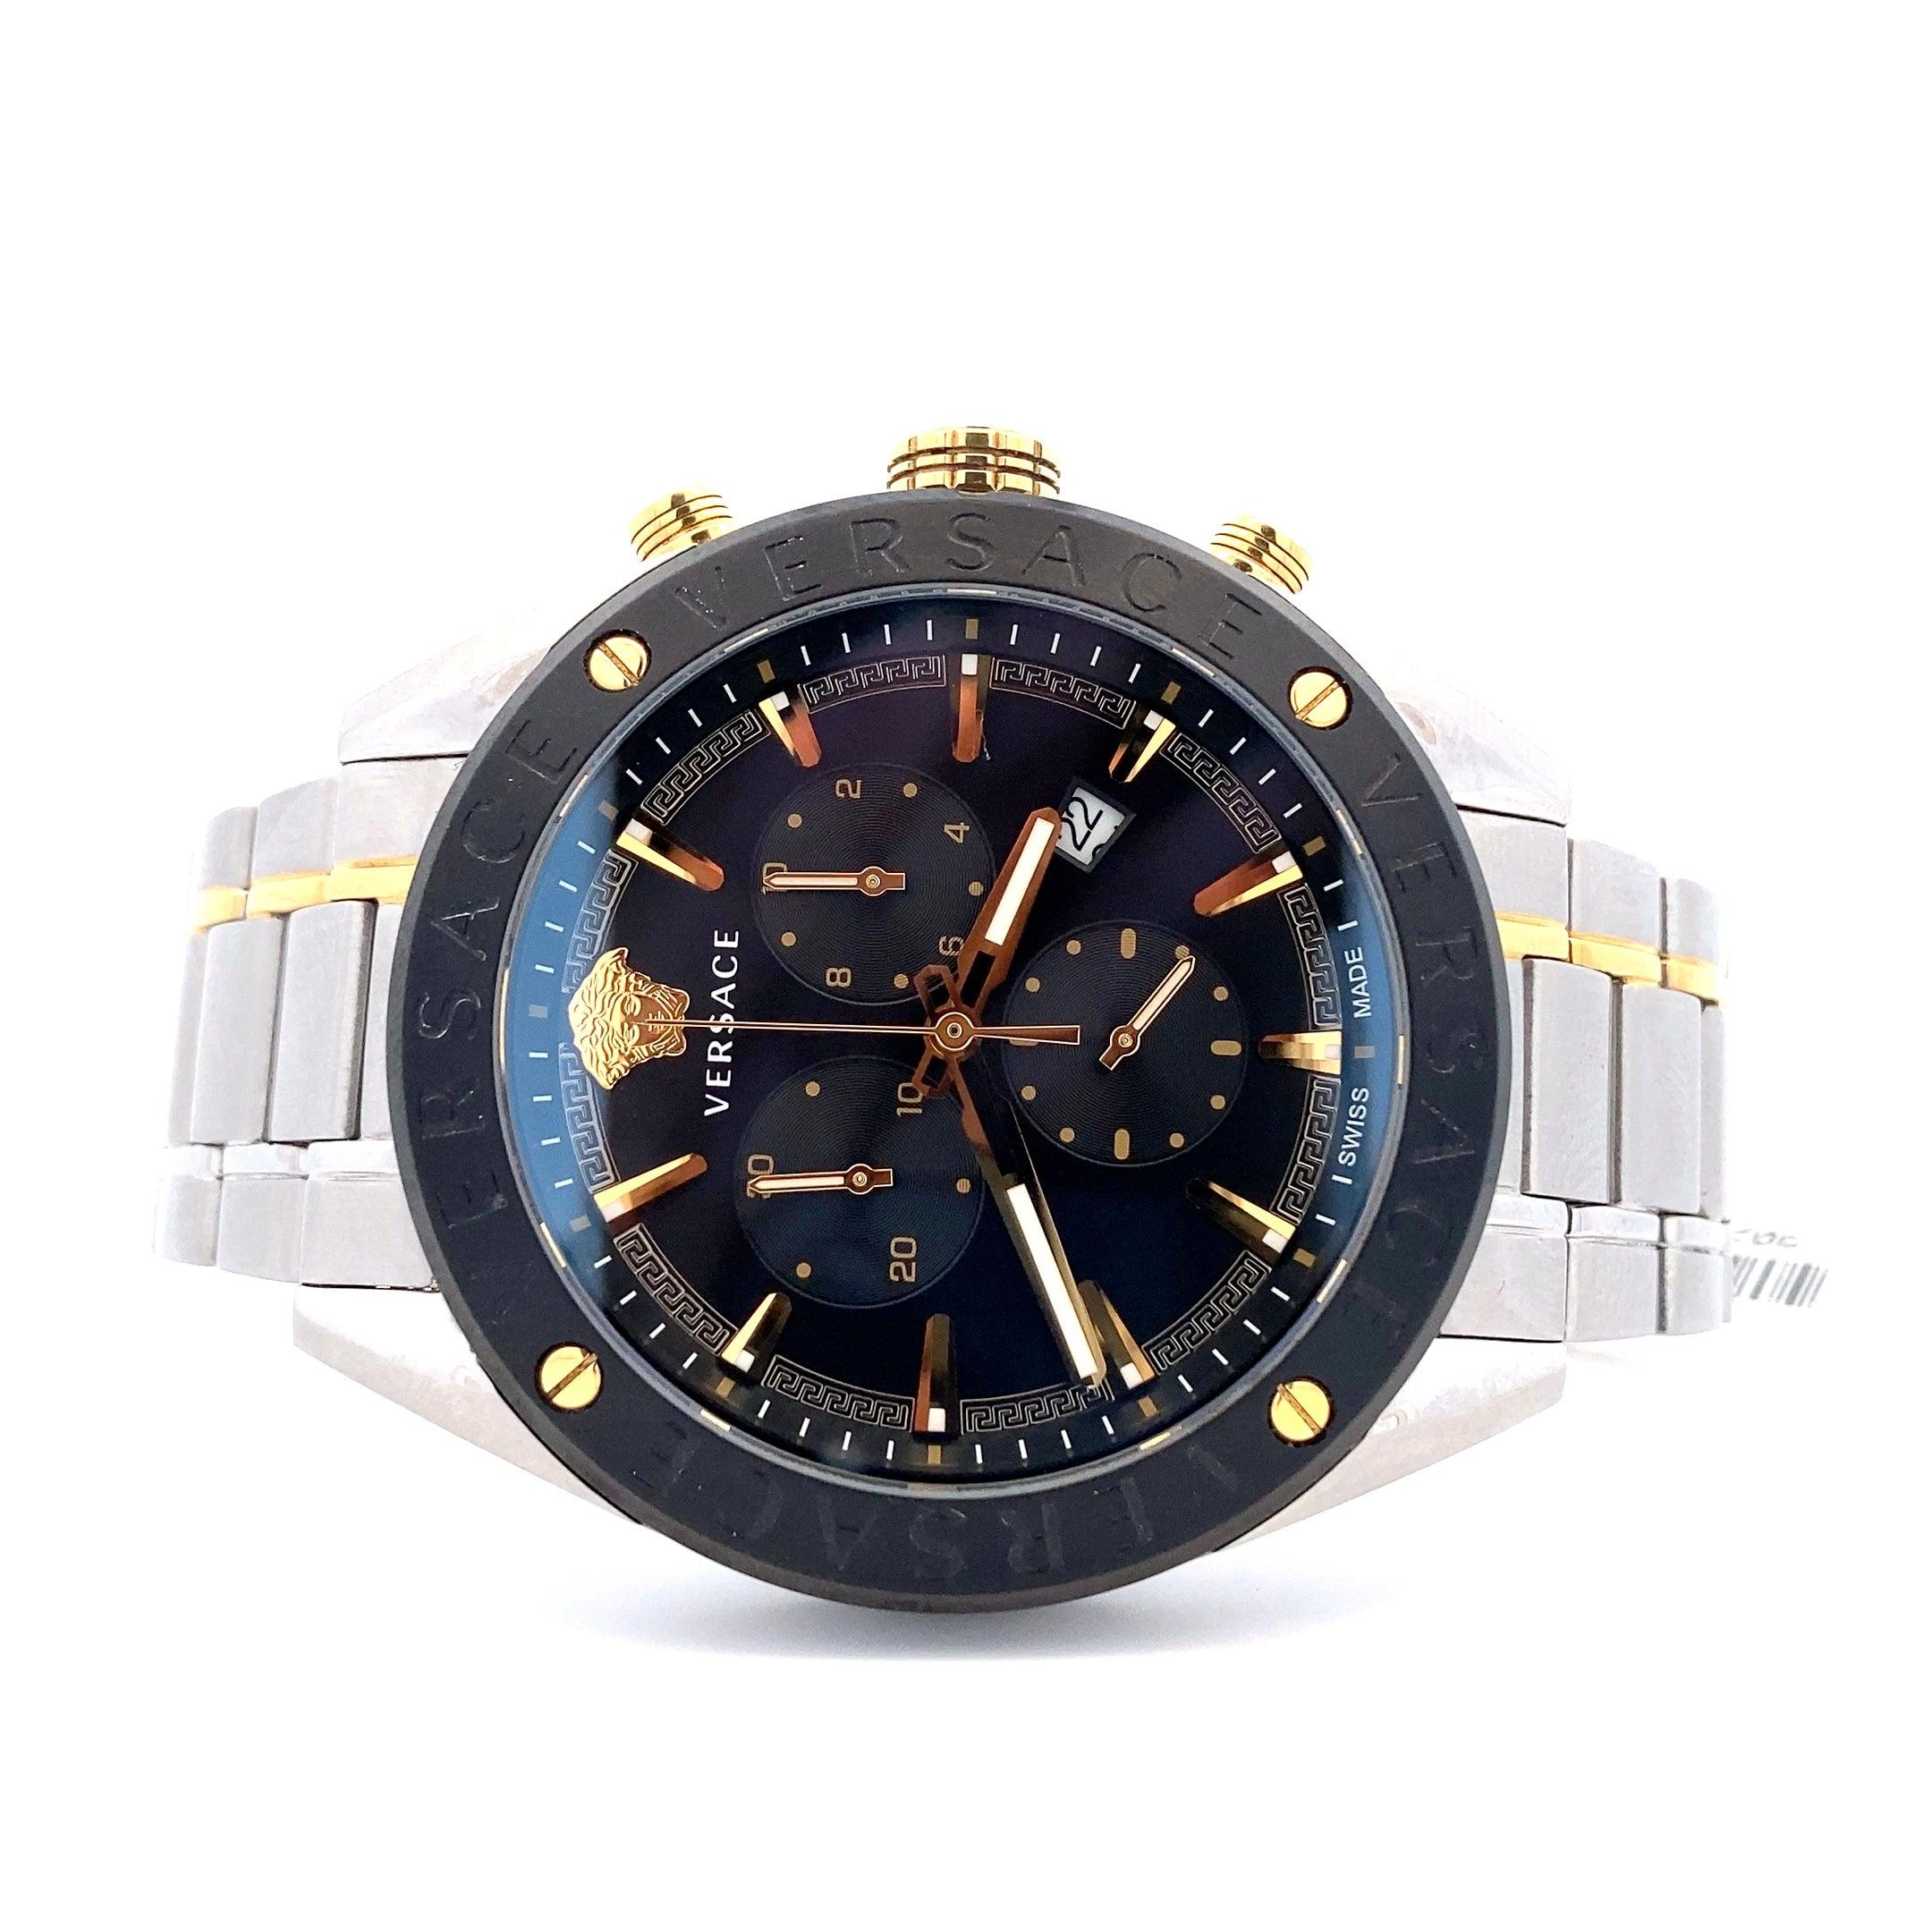 Versace Stainless Steel Silver & Gold Tone Detail Men's Chronograph Watch - ipawnishop.com